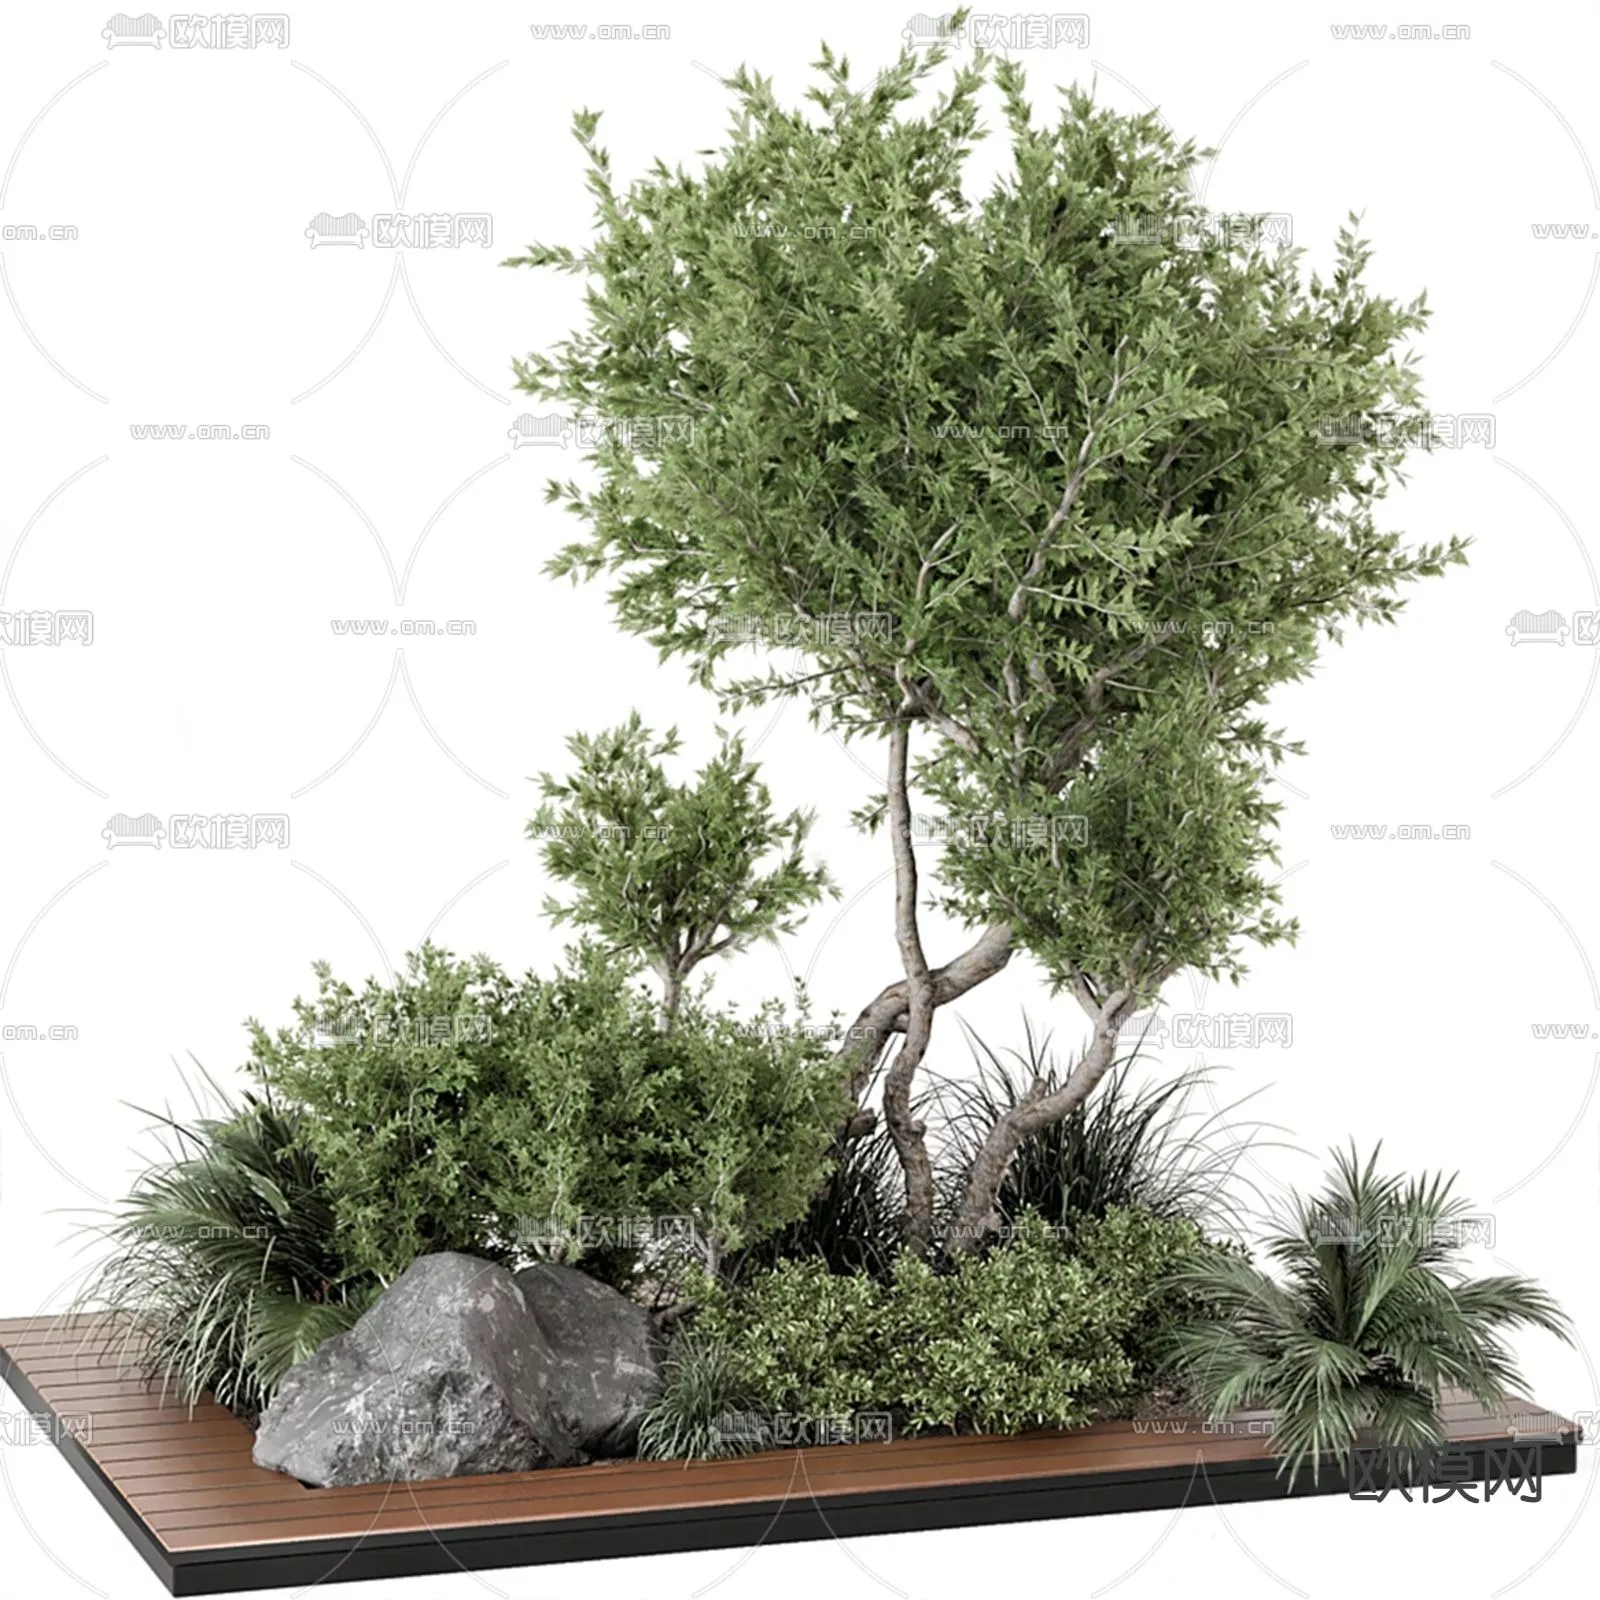 MODERN TREE - SKETCHUP 3D MODEL - VRAY OR ENSCAPE - ID15433